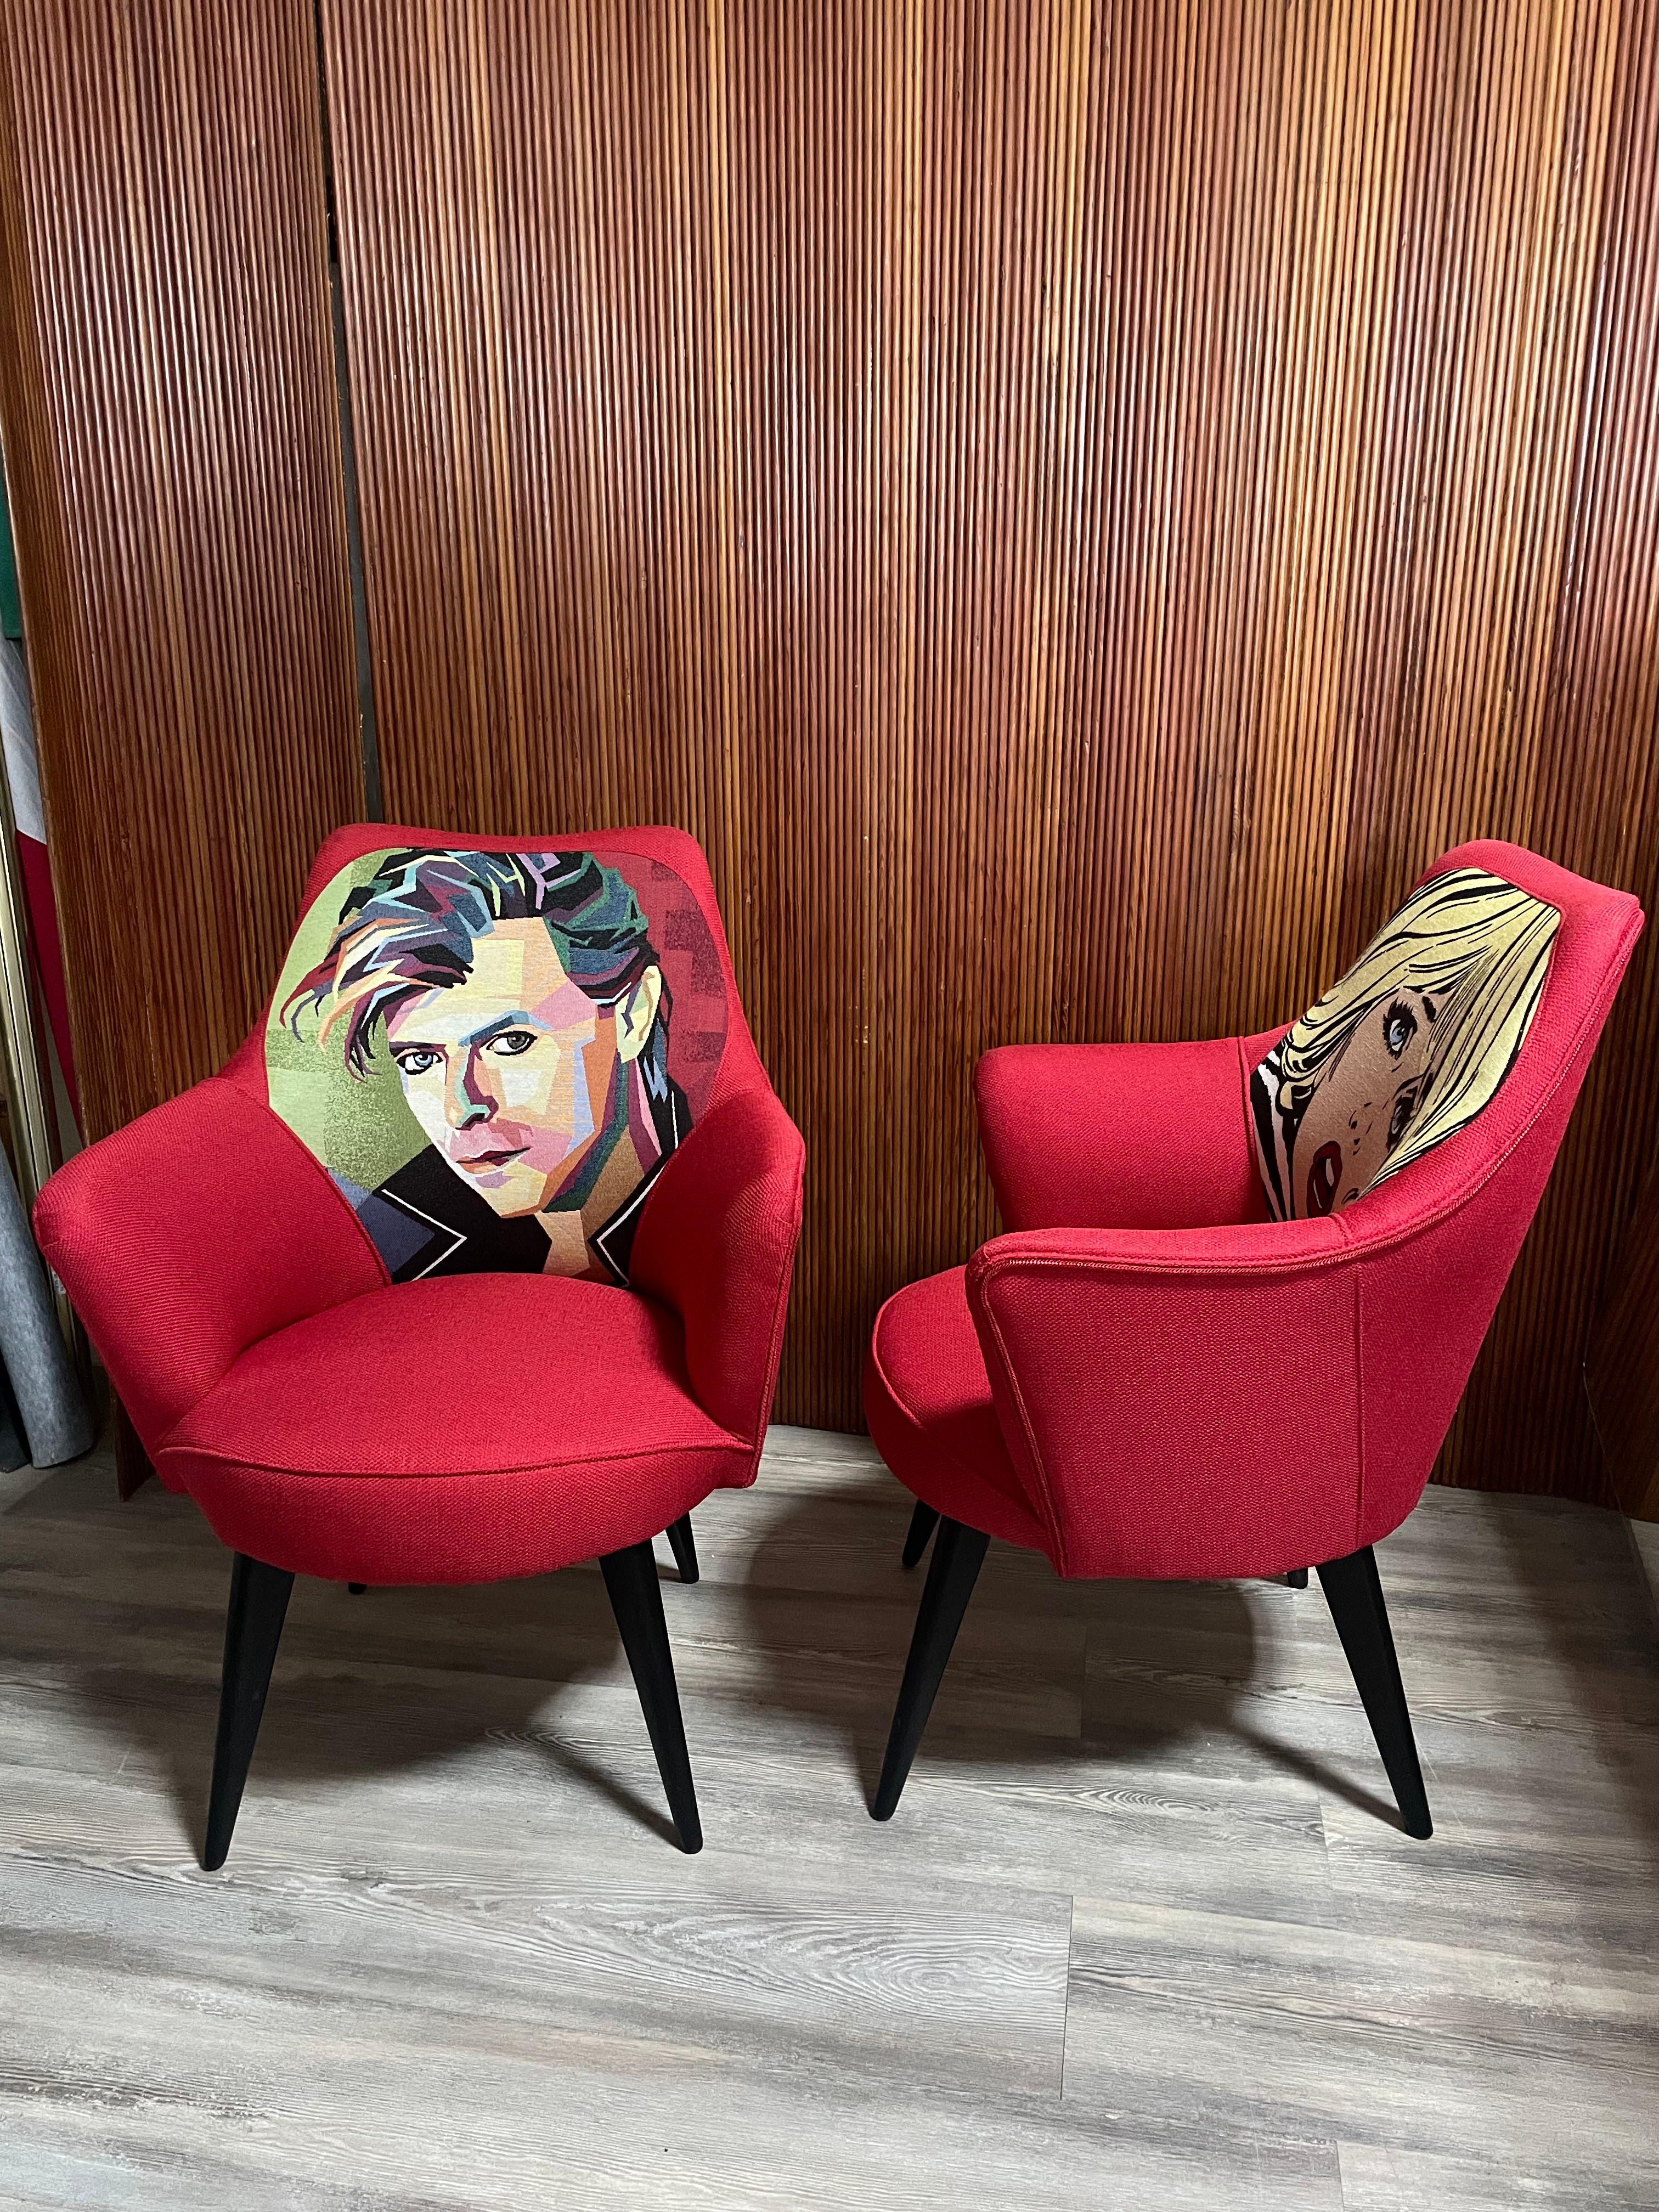 Original 1950s armchairs with squared leg in painted wood.

The upholstery of the armchairs has been recently redone while maintaining the original character given by the backrests in which two pop-art icons are depicted.